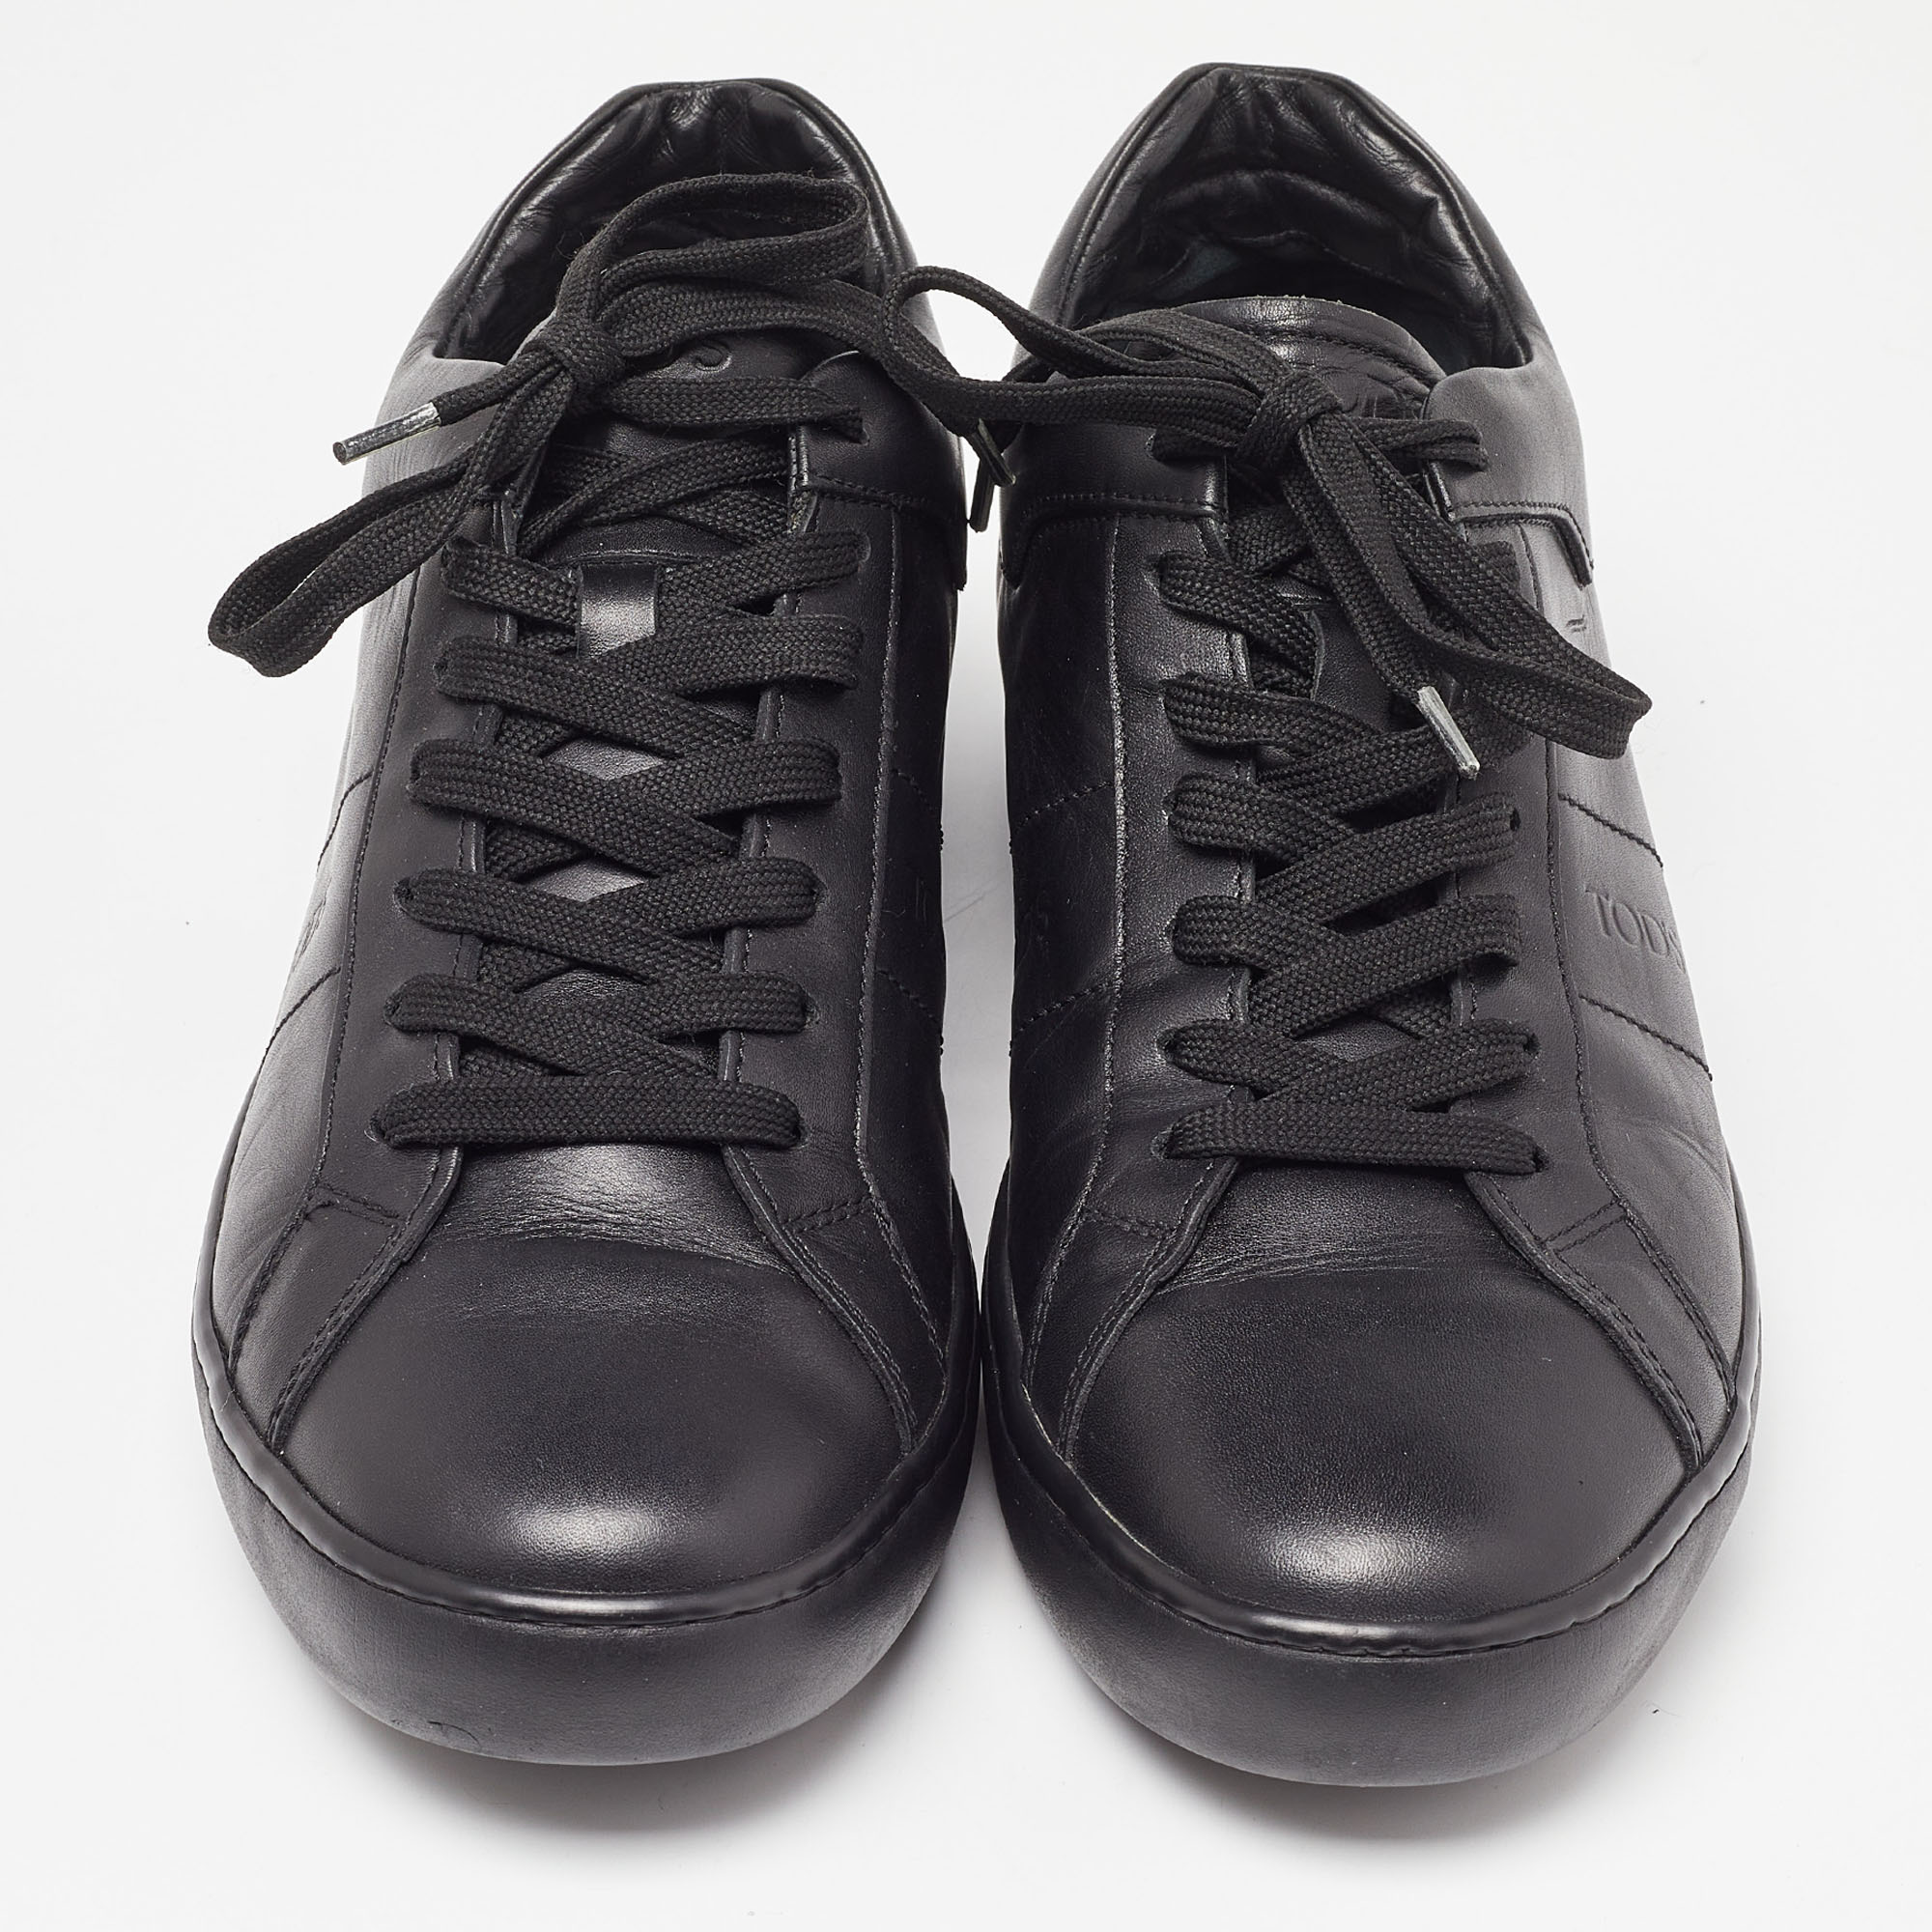 Tod's Black Leather Low Top Sneakers Size 44